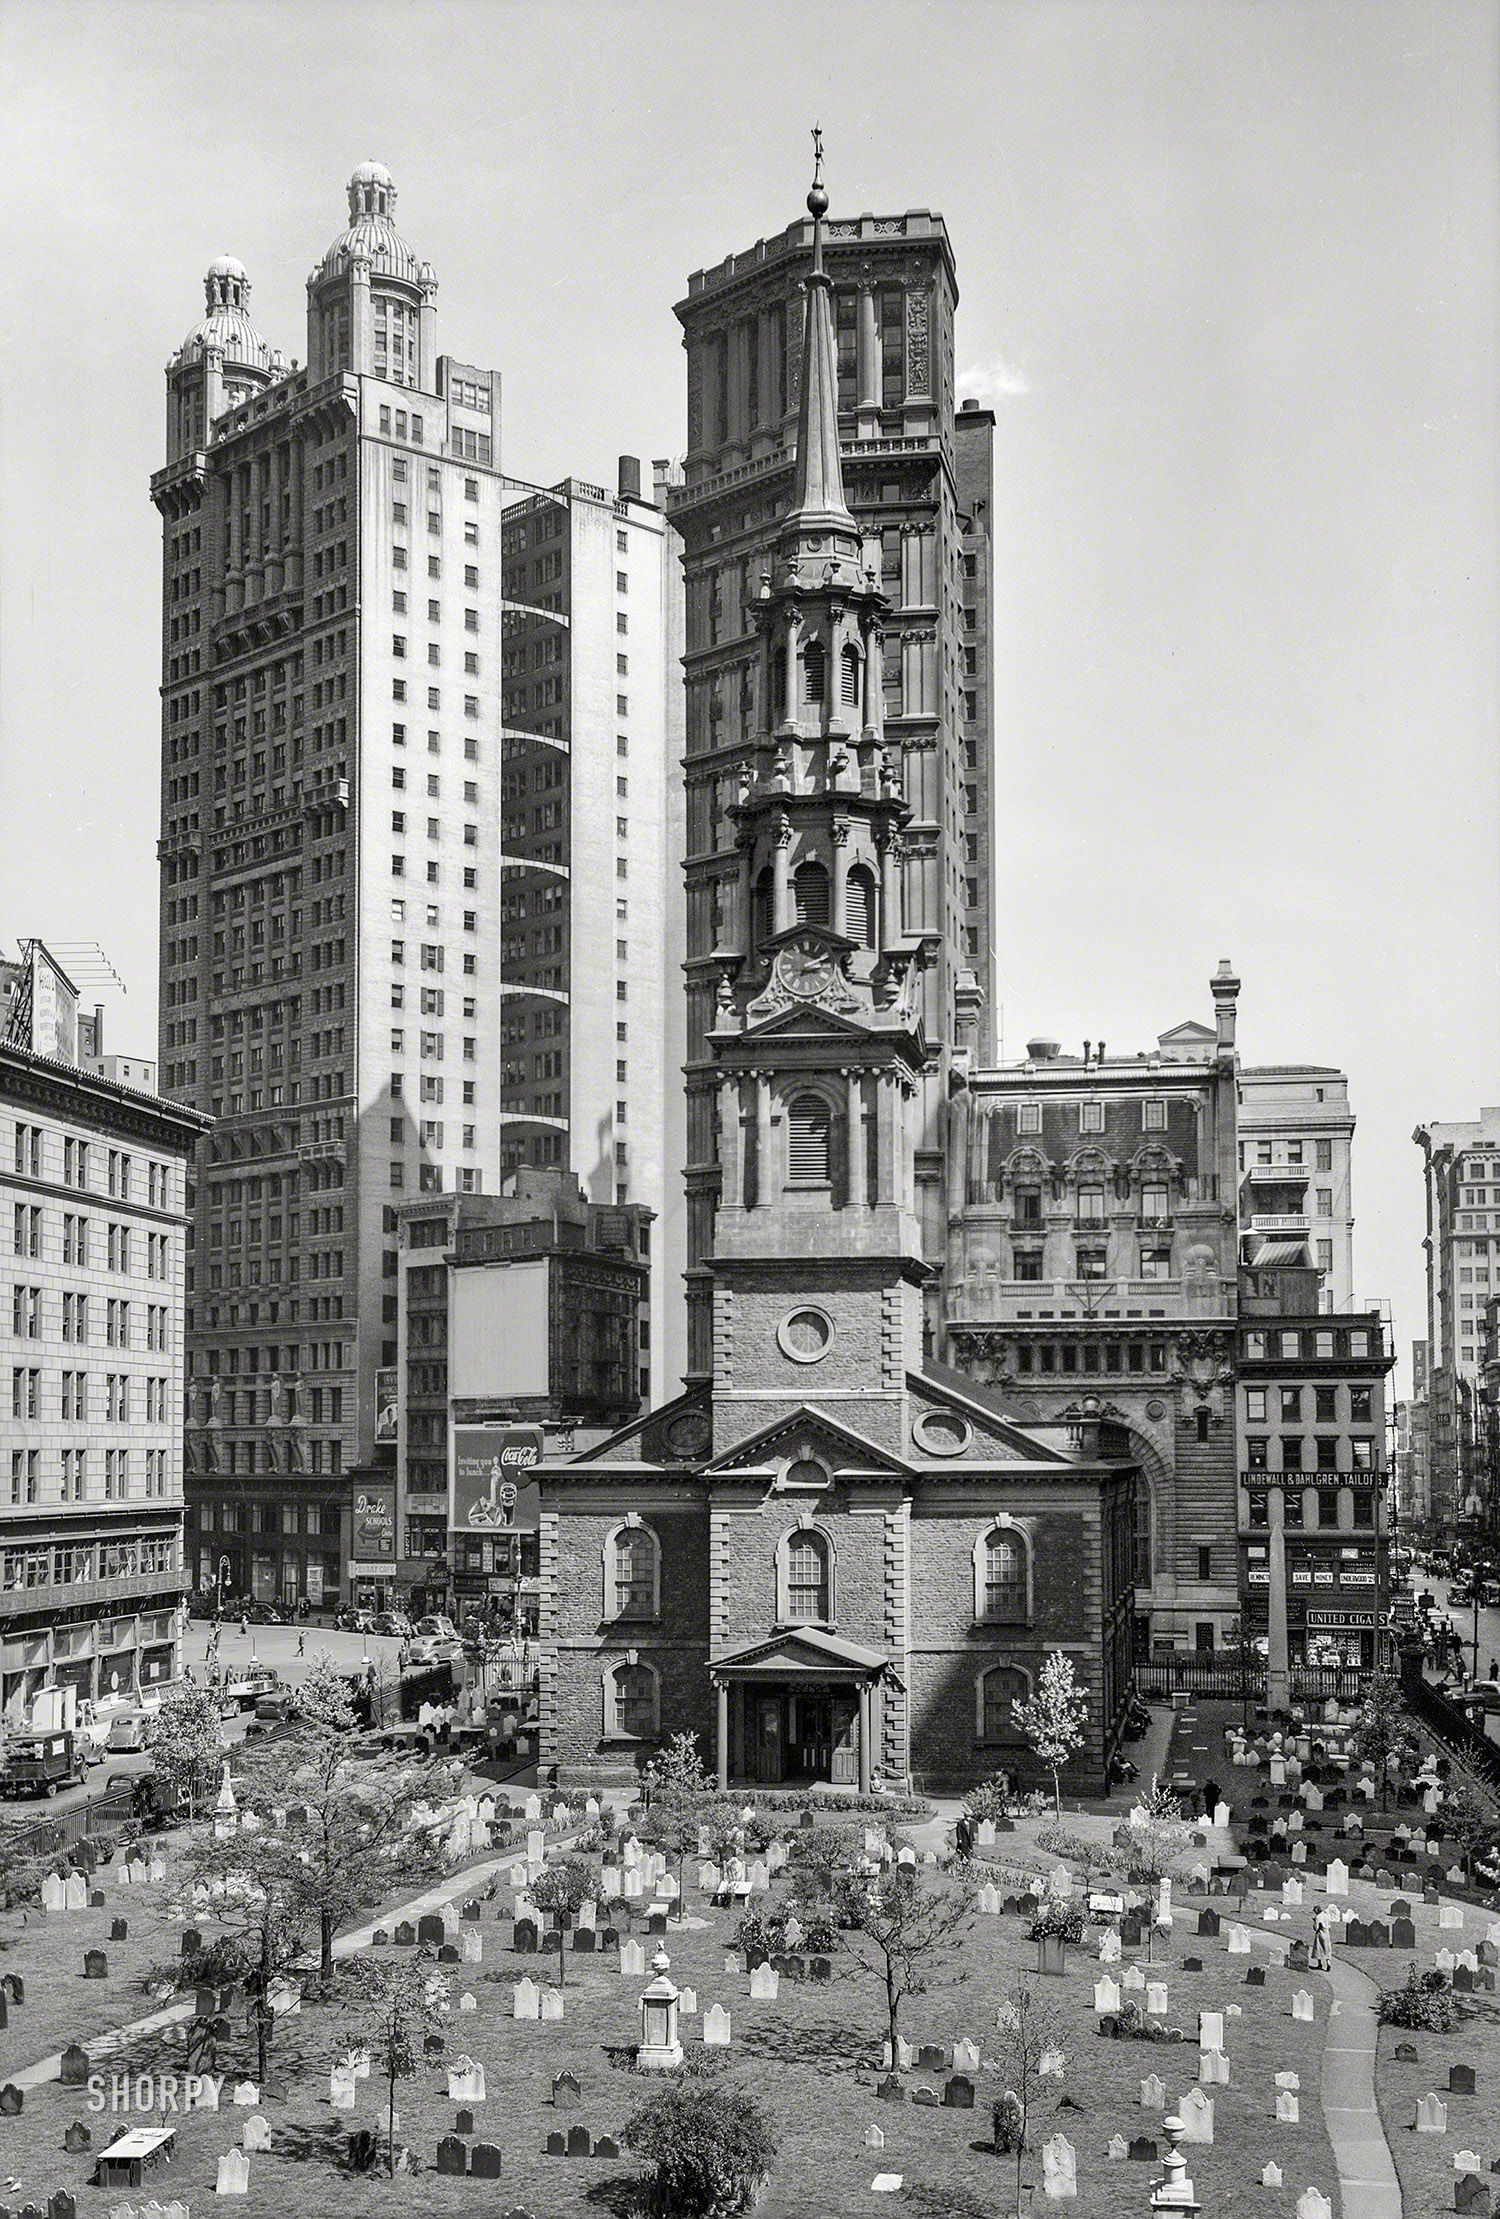 March 2, 1937. New York City. "St. Paul's chapel and churchyard, Broadway and Fulton streets." Overshadowed by two proto-skyscrapers from the 1890s, the Park Row and St. Paul buildings. Photo by Arnold Moses for the Historic American Buildings Survey. View full size.